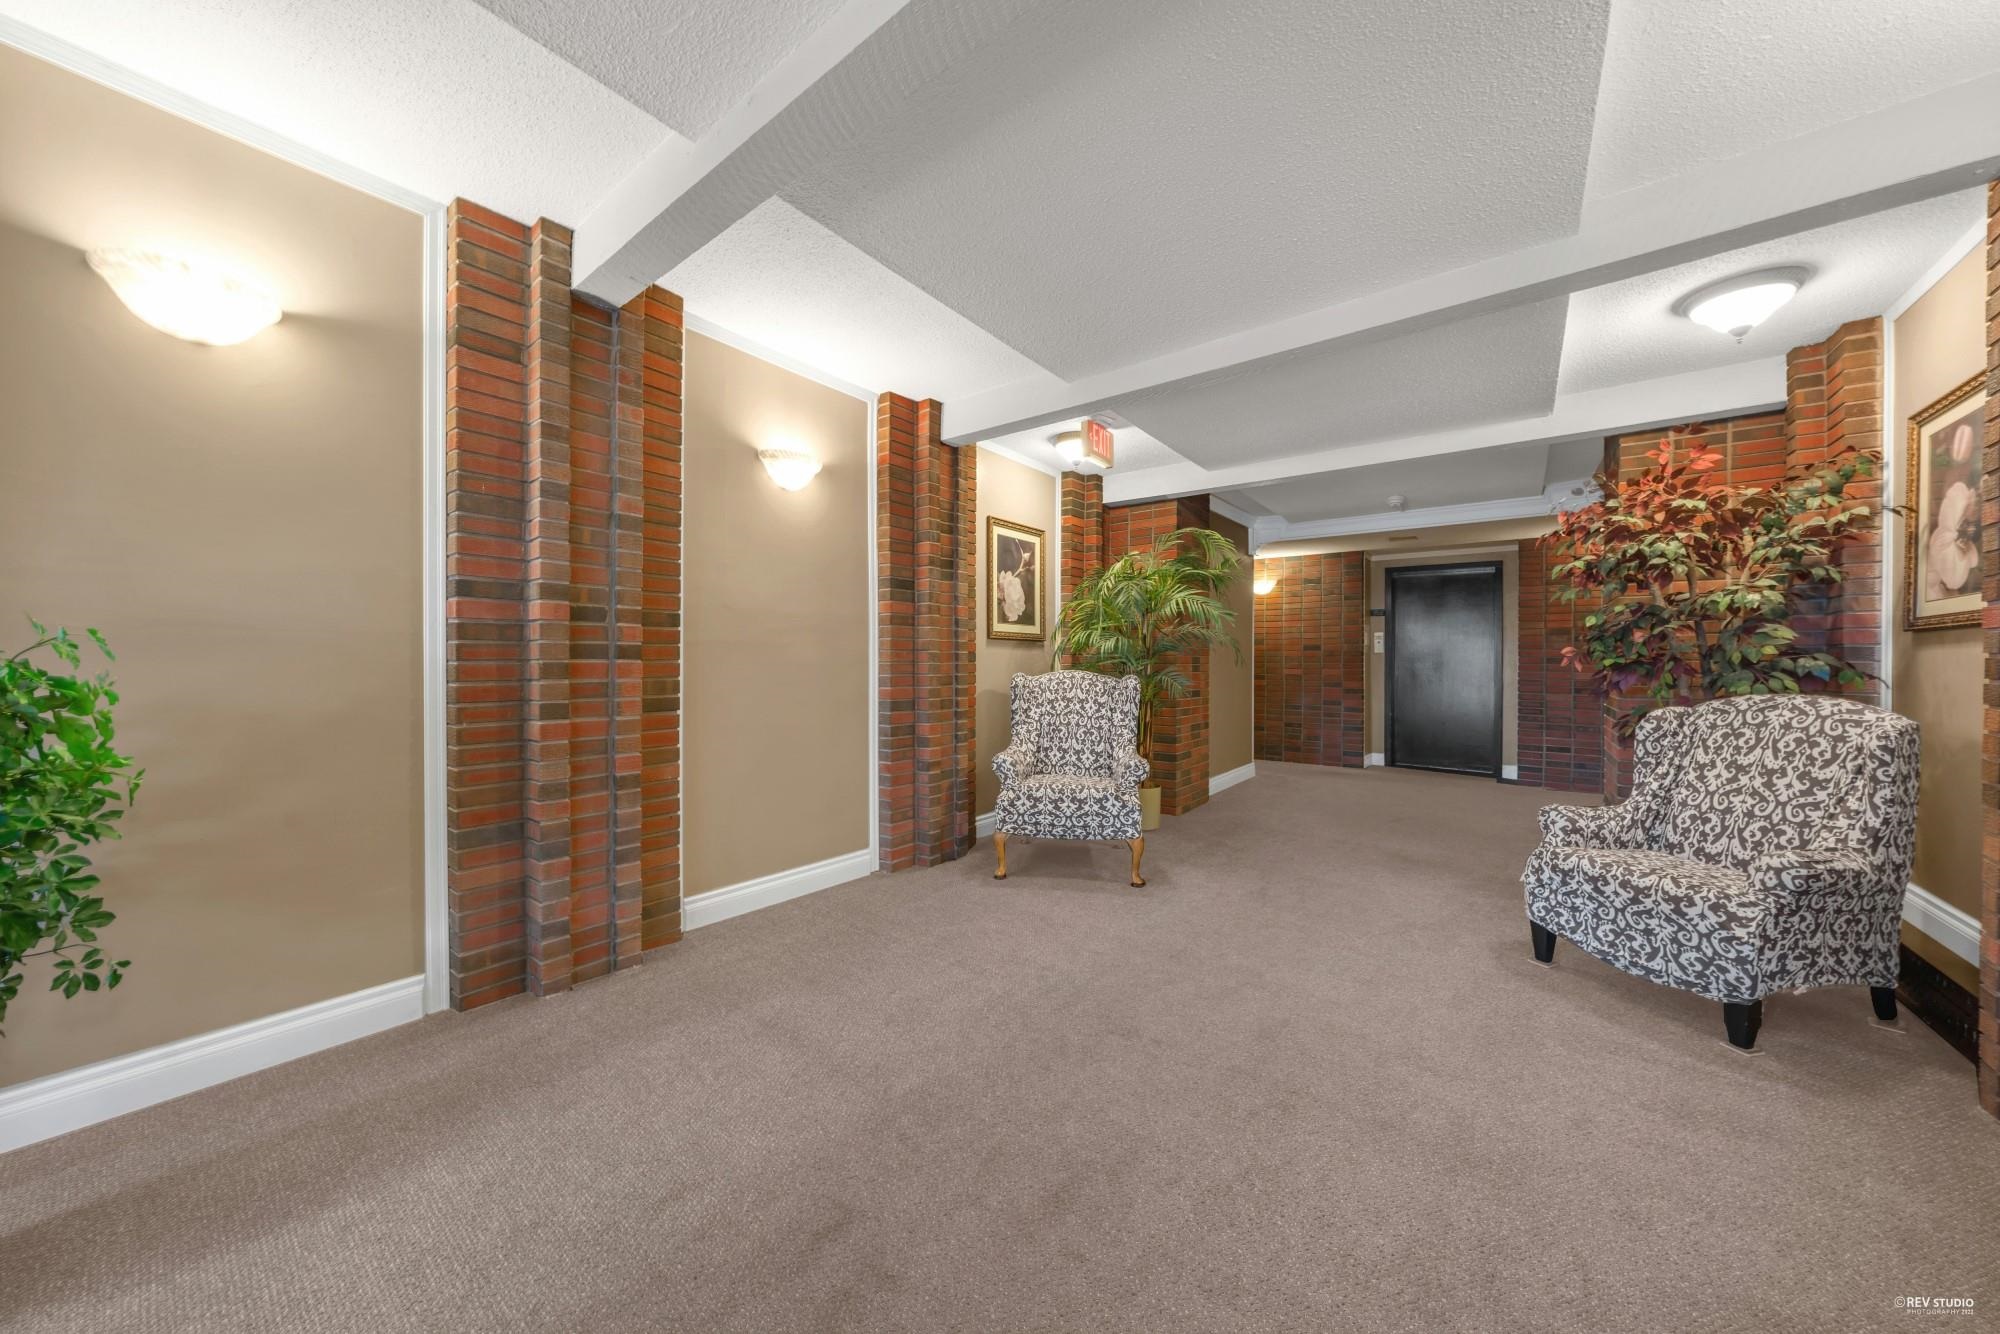 Thumb Image of 206 2710 LONSDALE AVENUE